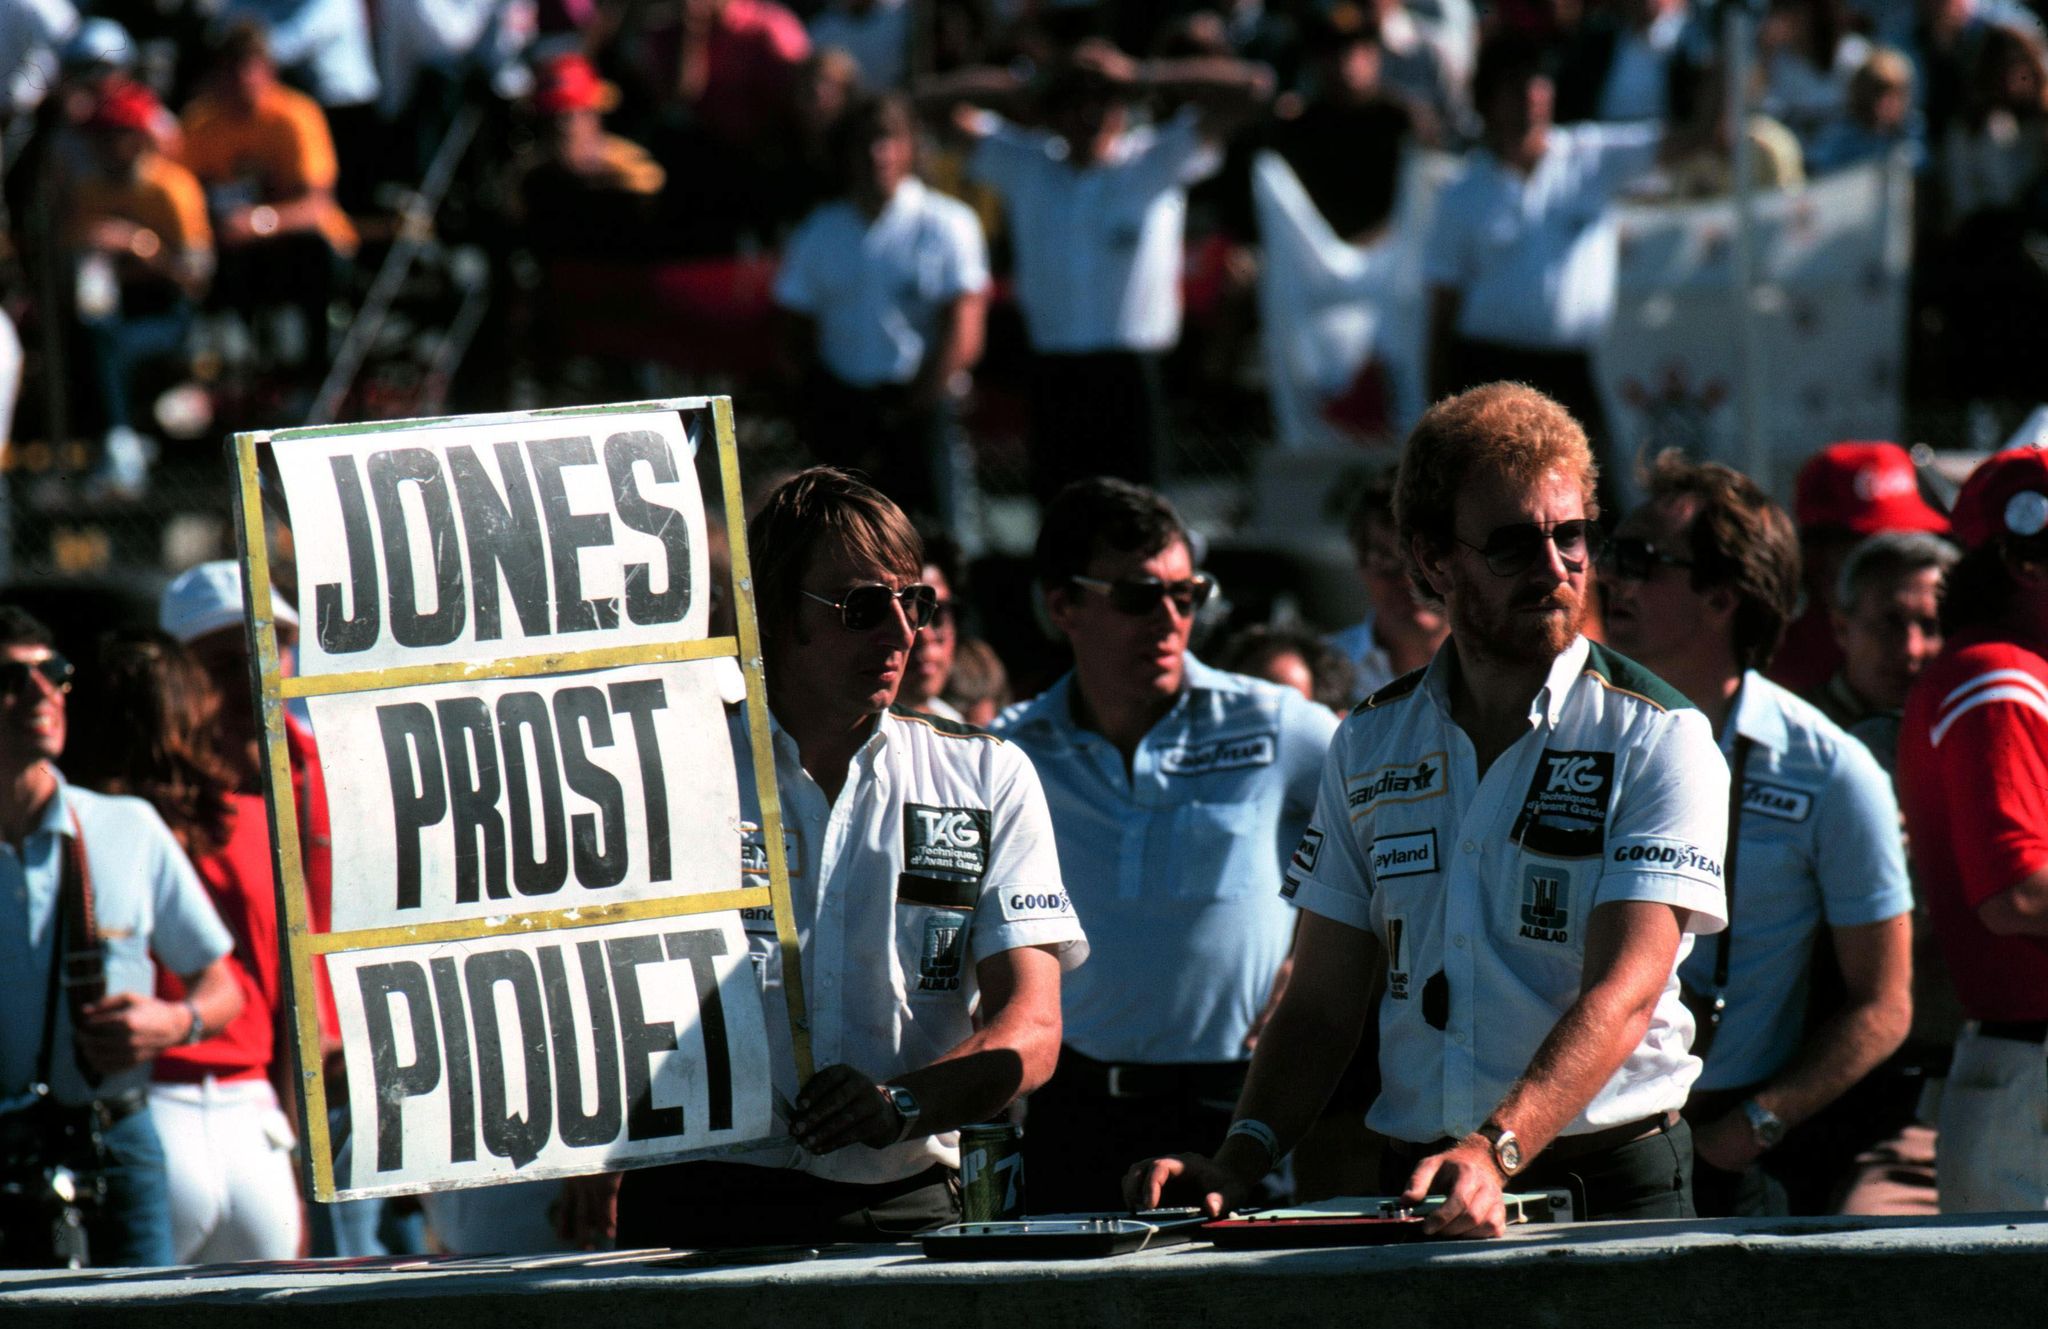 jeff hazell williams team manager holds the pit board informing carlos reutemann arg that as things stood he would not be world champion united states grand prix, caesars palace, las vegas, 17 october 1981